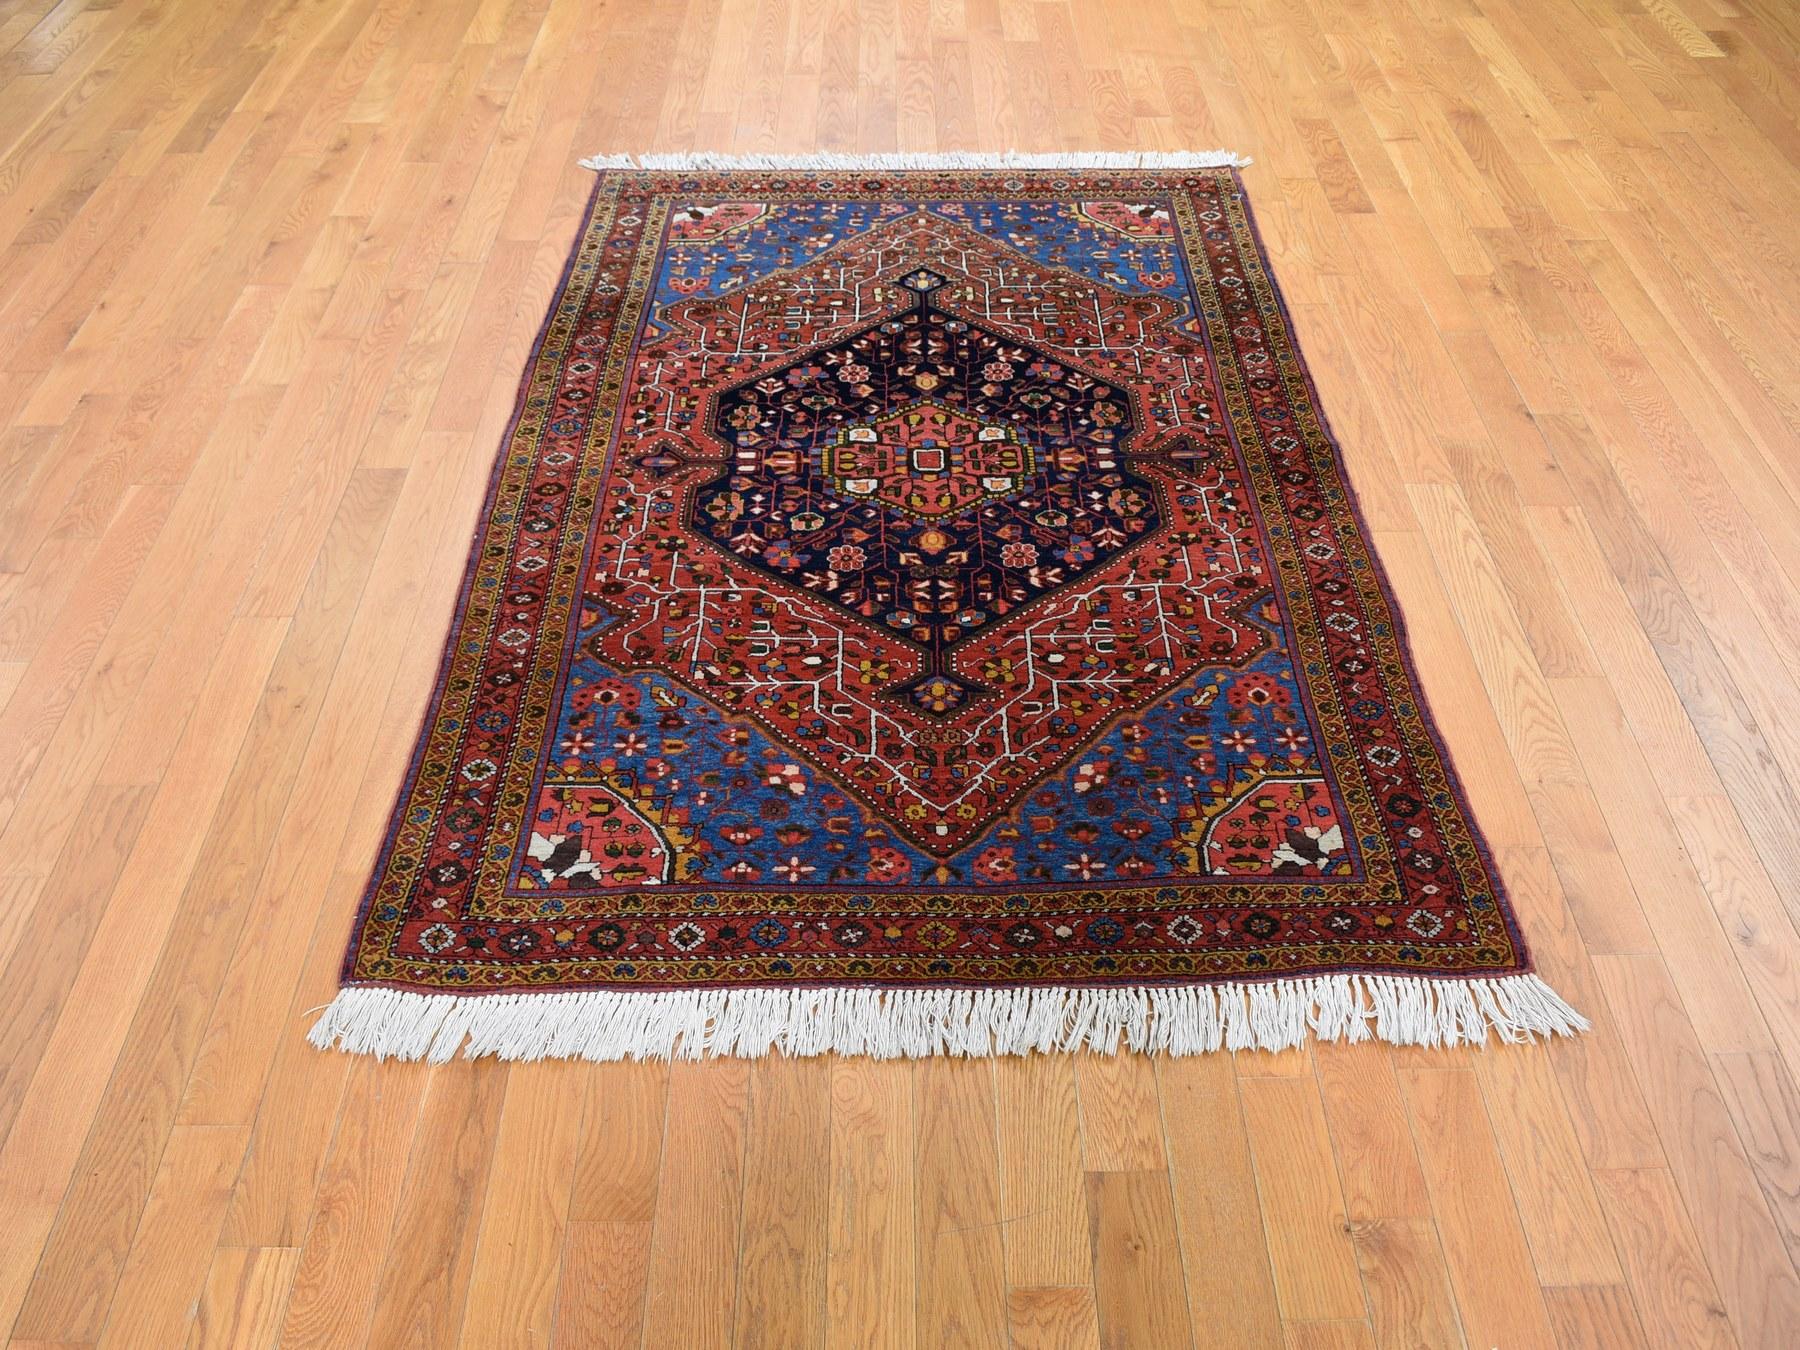 This fabulous hand knotted carpet has been created and designed for extra strength and durability. This rug has been handcrafted for weeks in the traditional method that is used to make rugs. This is truly a one-of-kind piece. Measures: 4'3